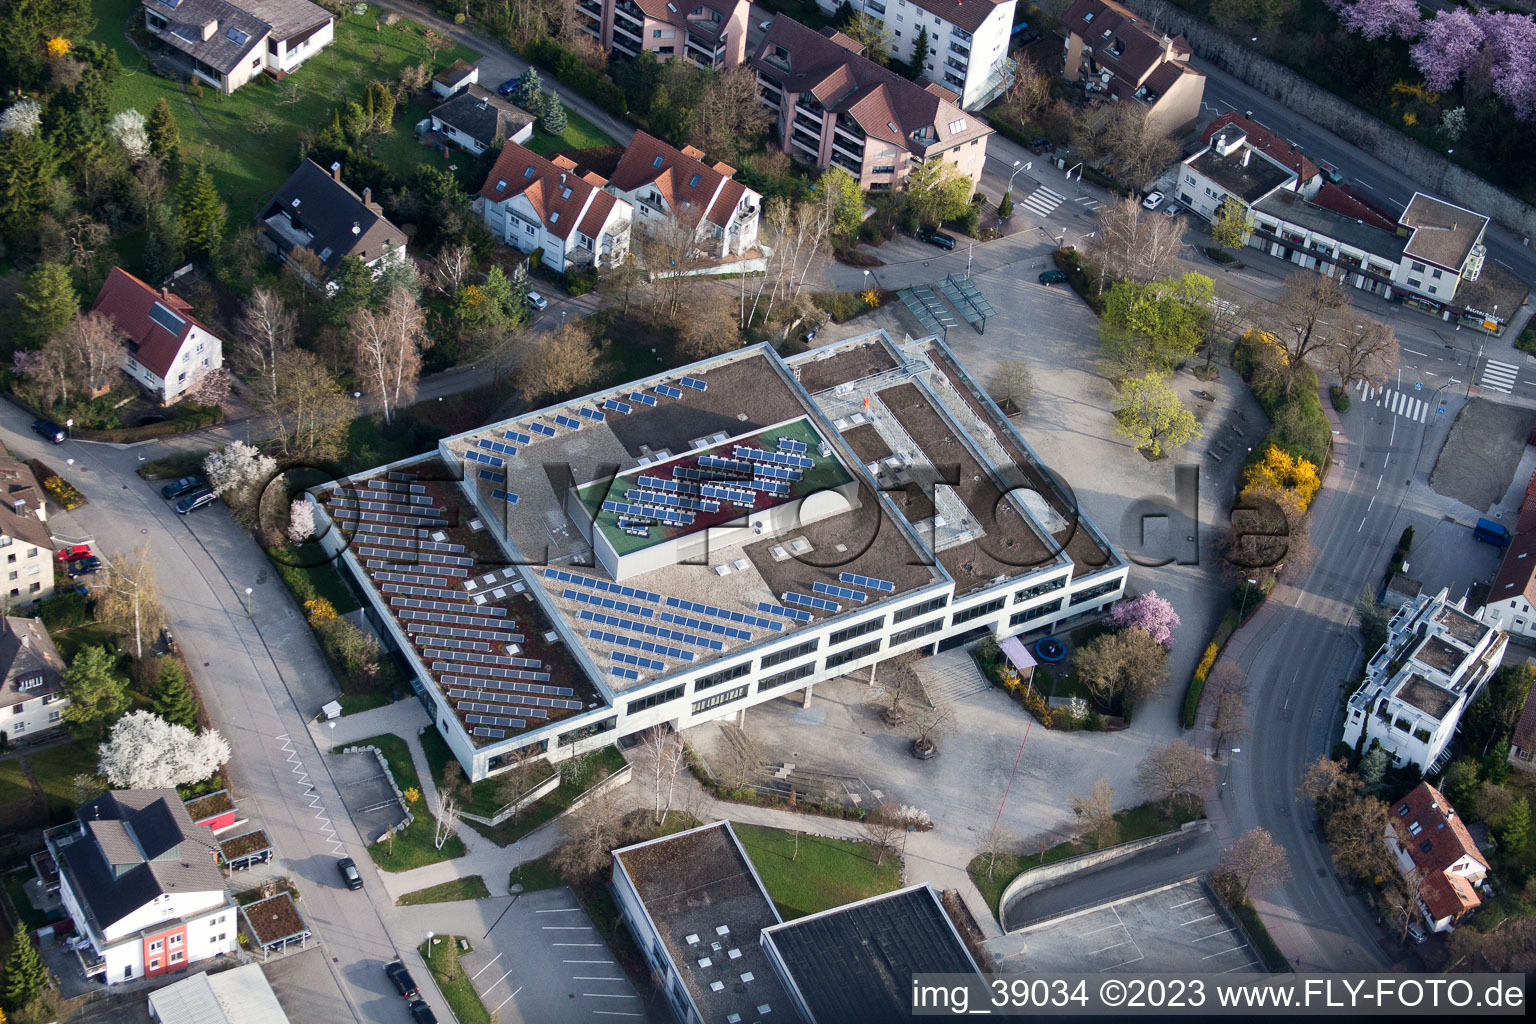 Johannes Kepler High School, Lindenstr in Leonberg in the state Baden-Wuerttemberg, Germany out of the air